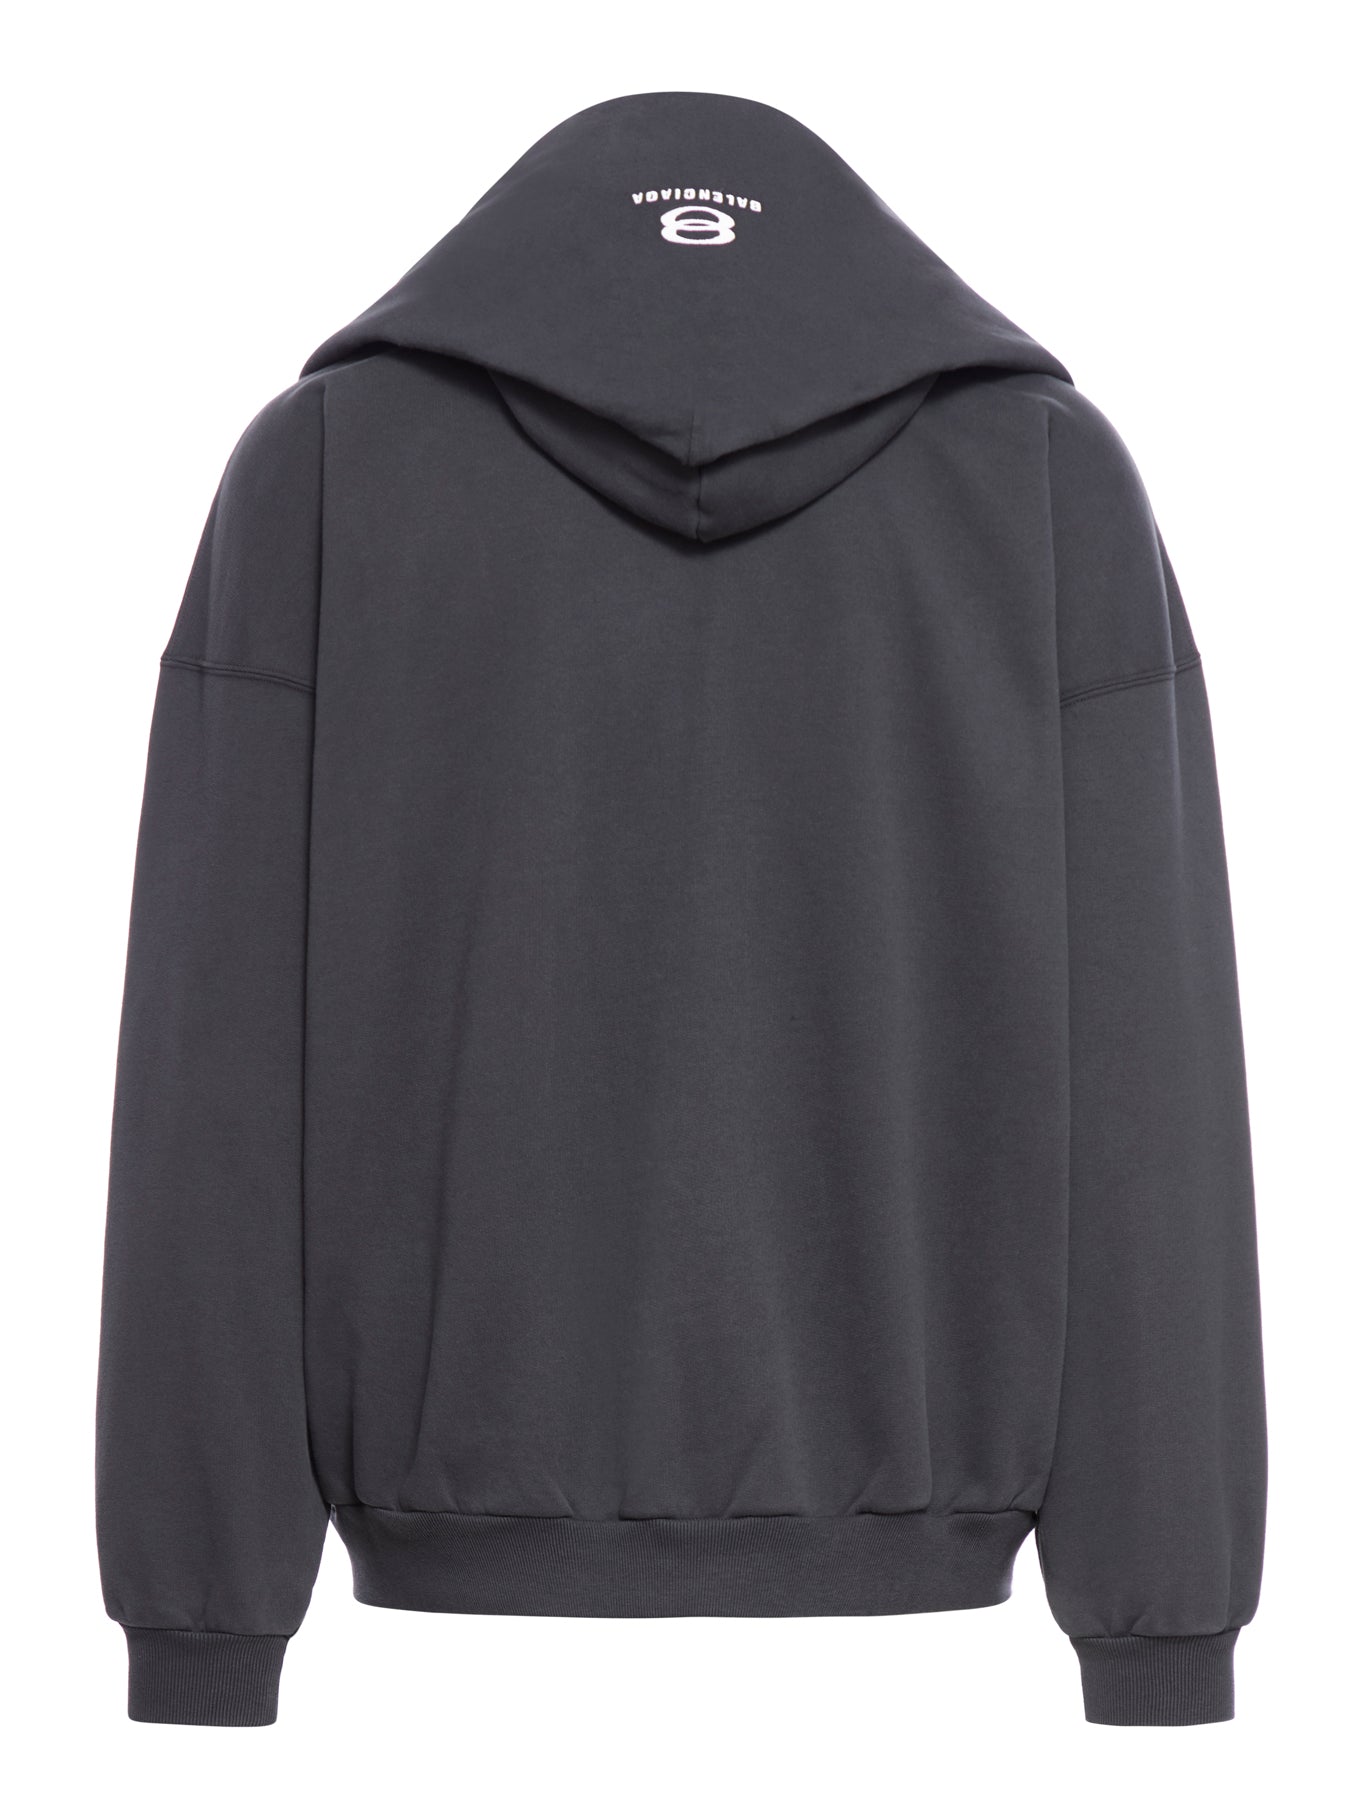 INCOGNITO FULL-ZIP JERSEY HOODIE